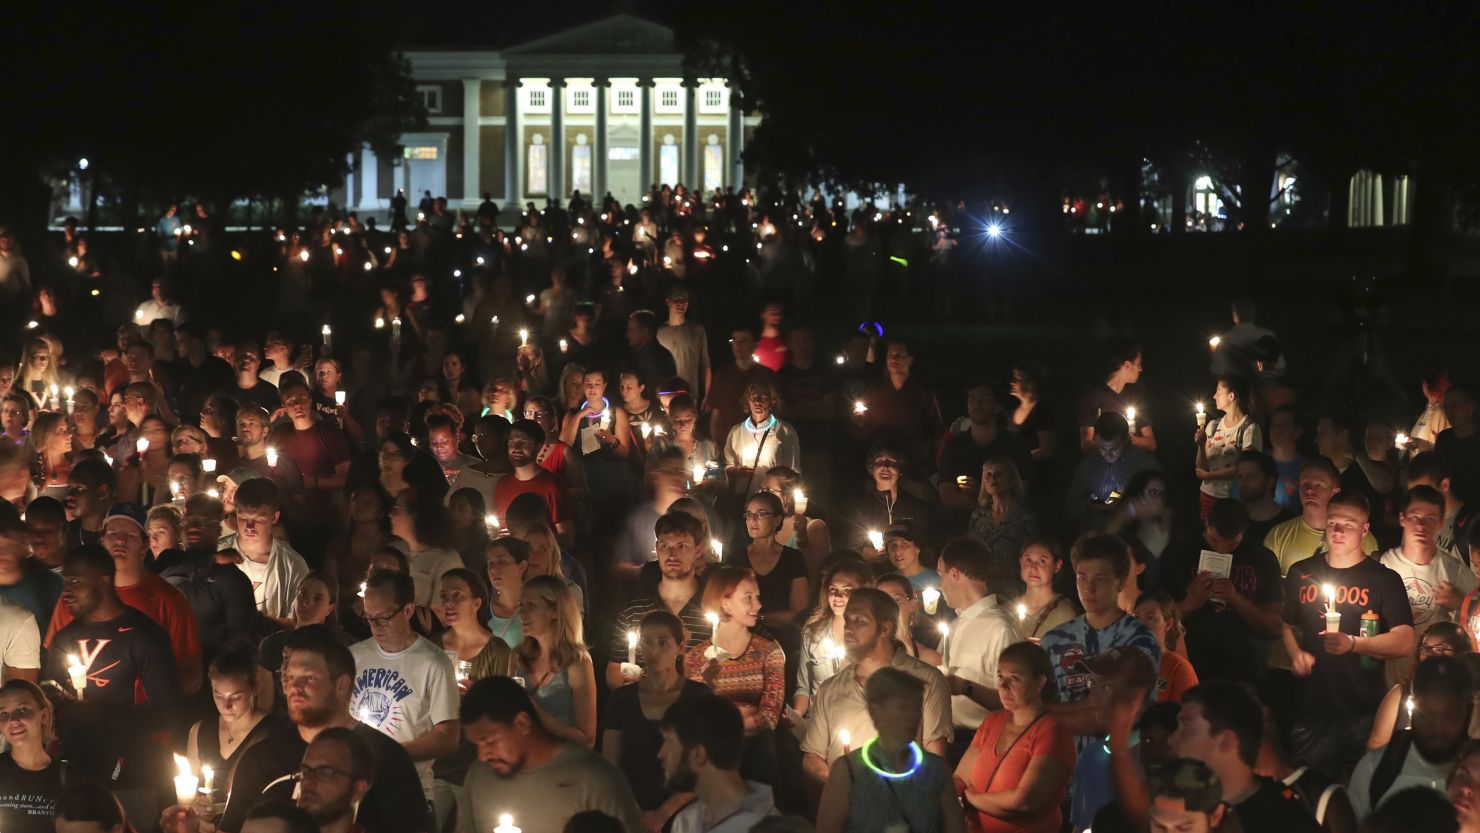 University of Virginia students, faculty and residents attend a candlelight march on campus on Wednesday, August 16 -- four days after Charlottesville erupted in chaos during a white nationalist rally.